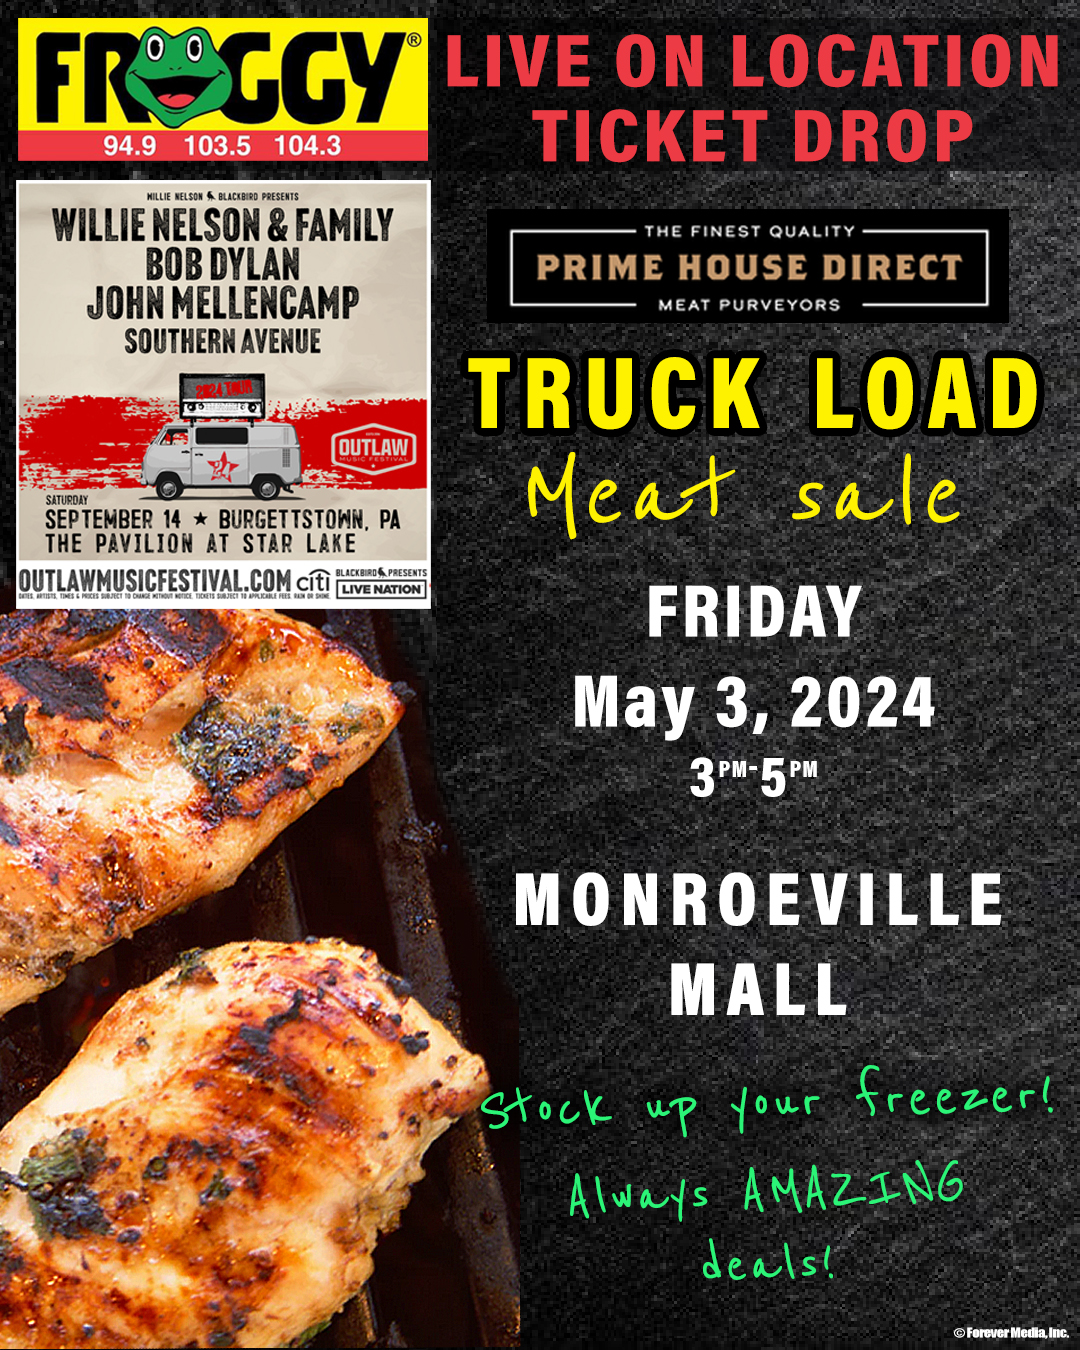 Truckload Meat Sale @ Monroeville Mall